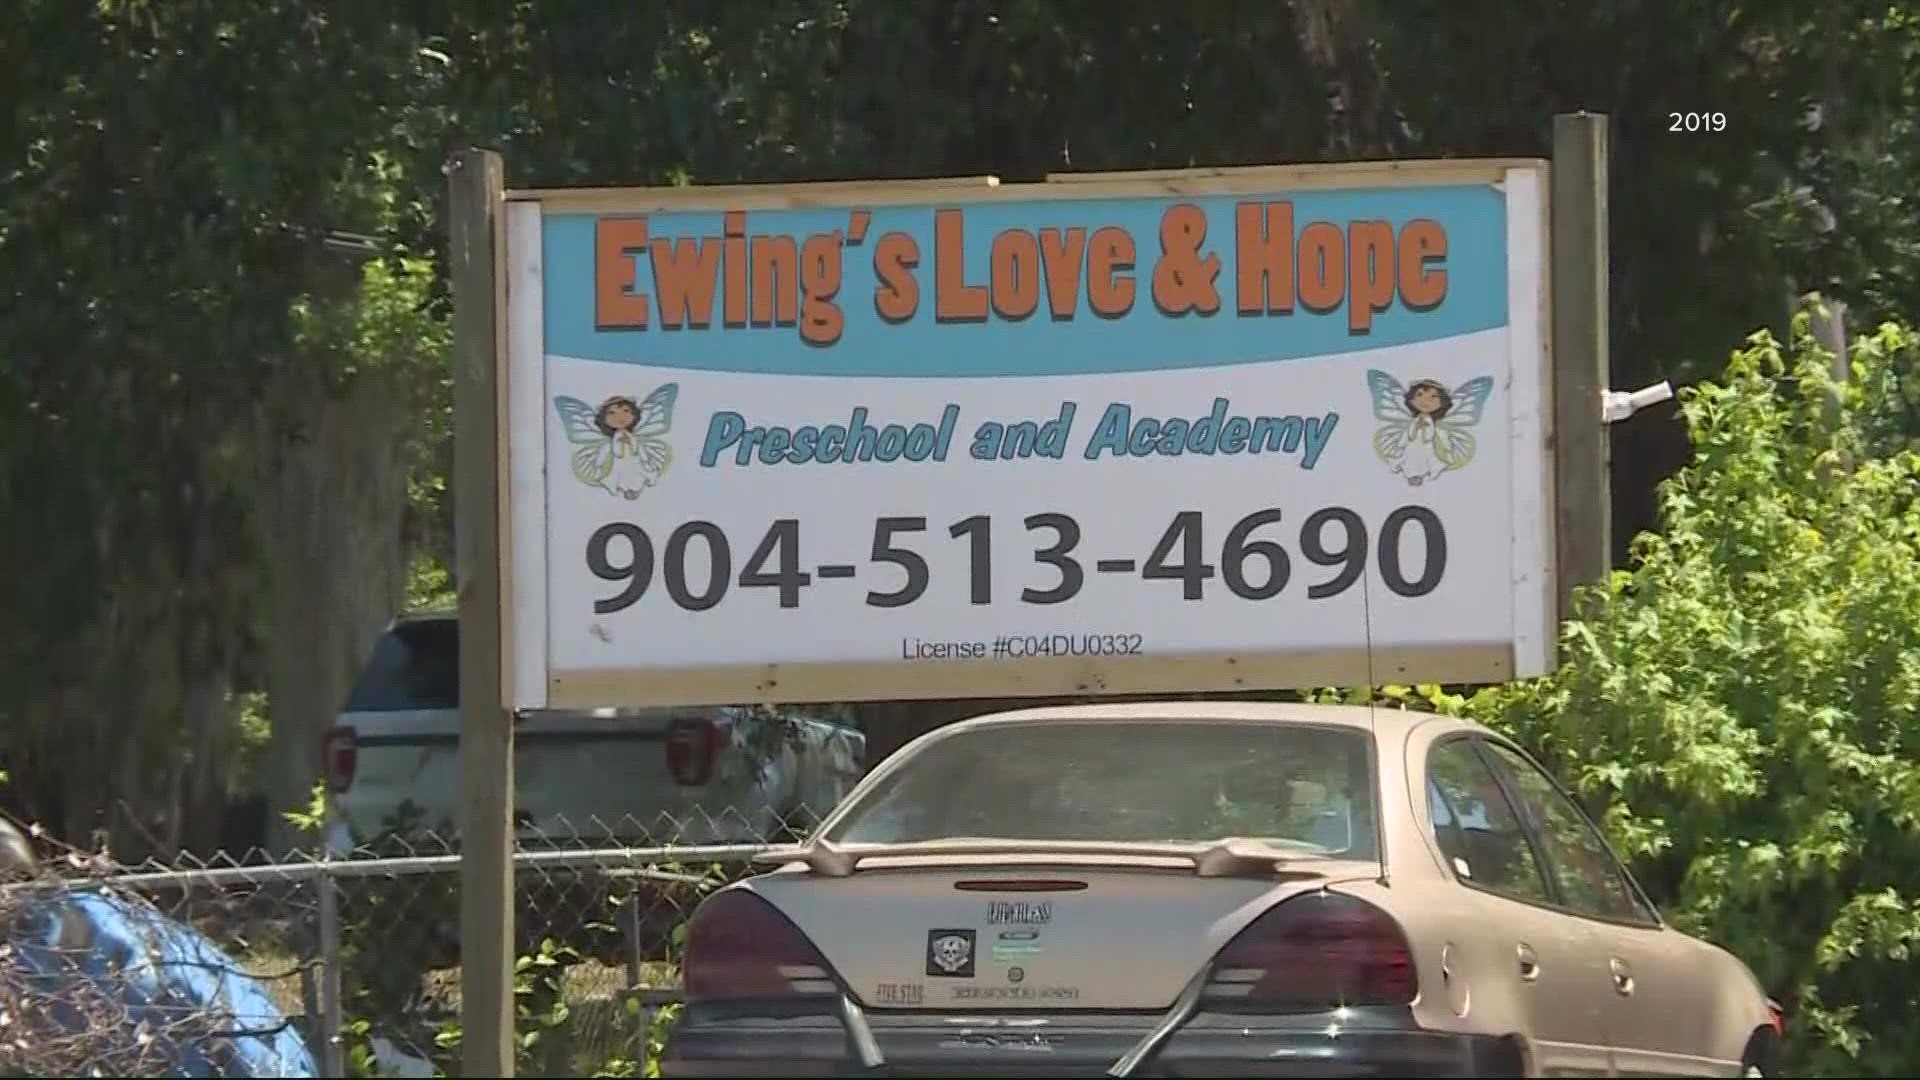 The insurance company says Ewing’s Love & Hope preschool's policy was cancelled weeks before the 4-month-old baby died.